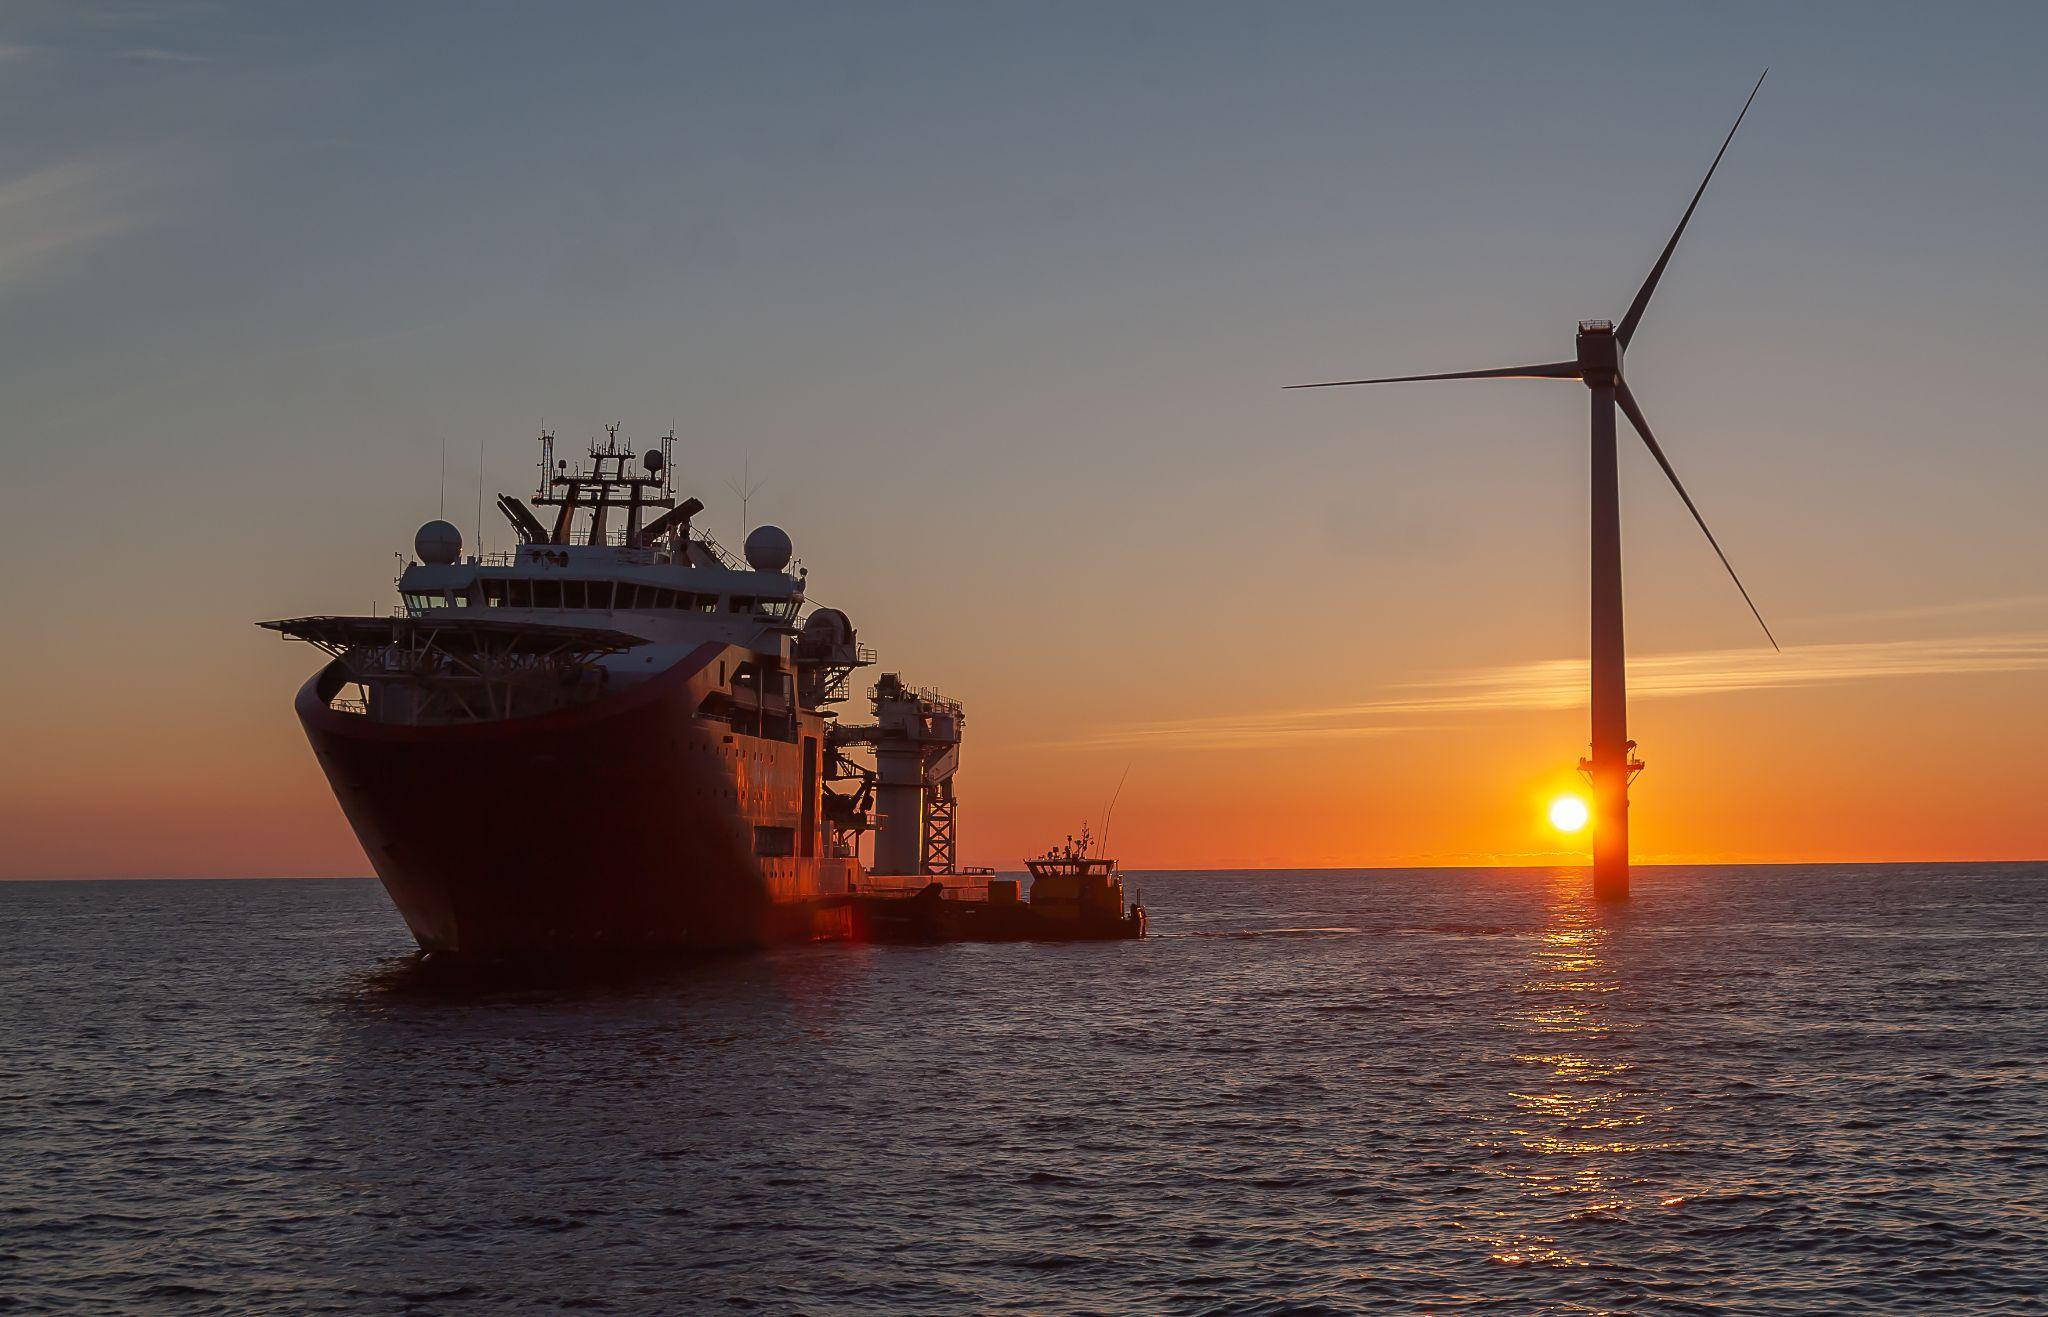 Service operational vesel with crew transfer vessel along side as the sun goes down on the windfarm